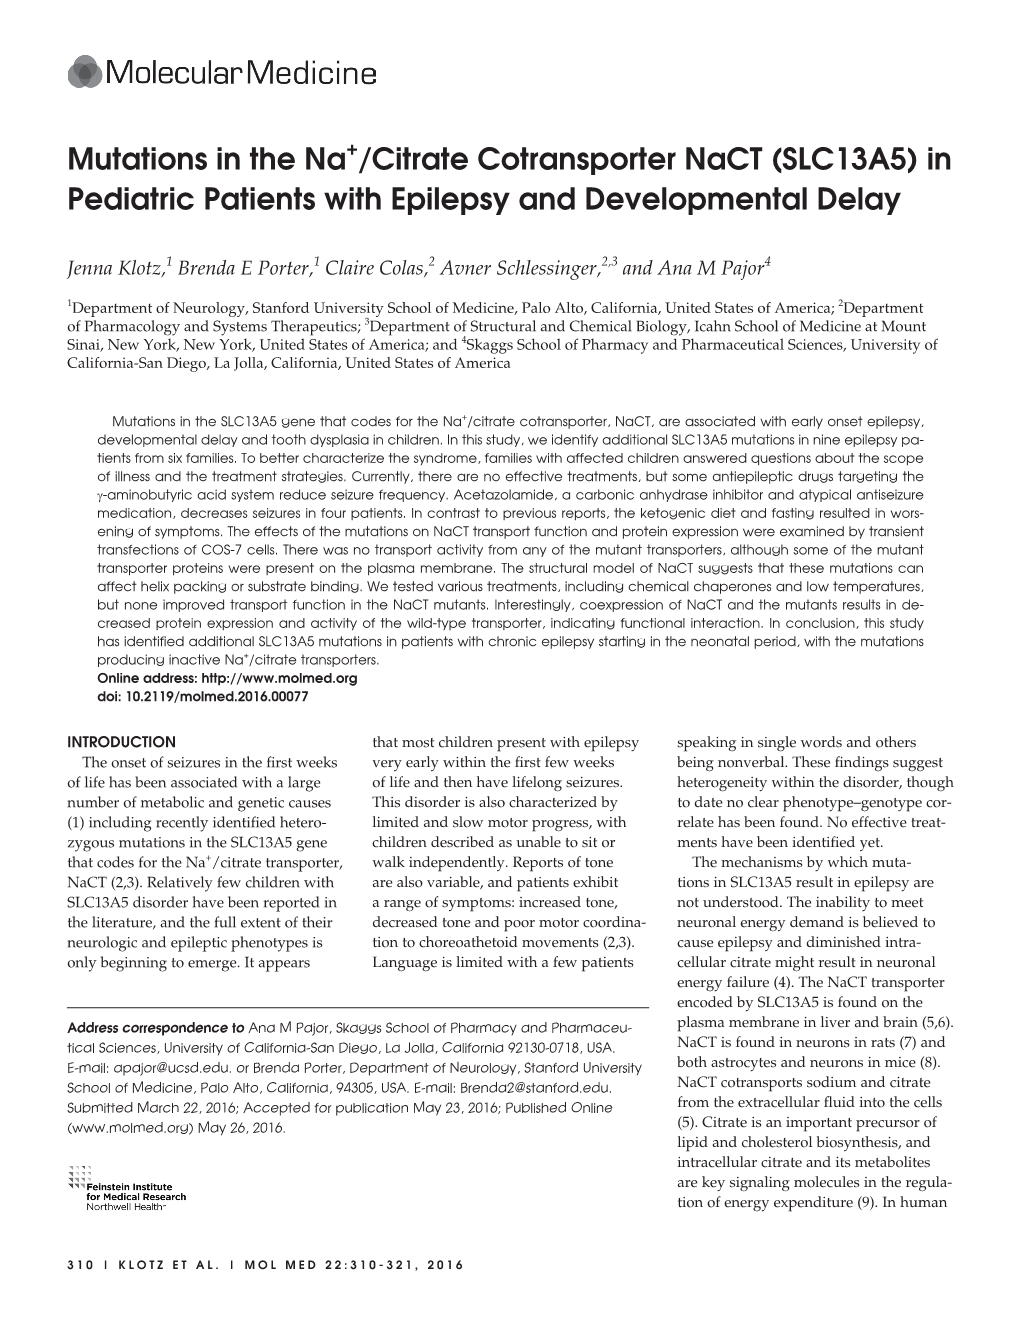 Mutations in the Na+/Citrate Cotransporter Nact (SLC13A5) in Pediatric Patients with Epilepsy and Developmental Delay